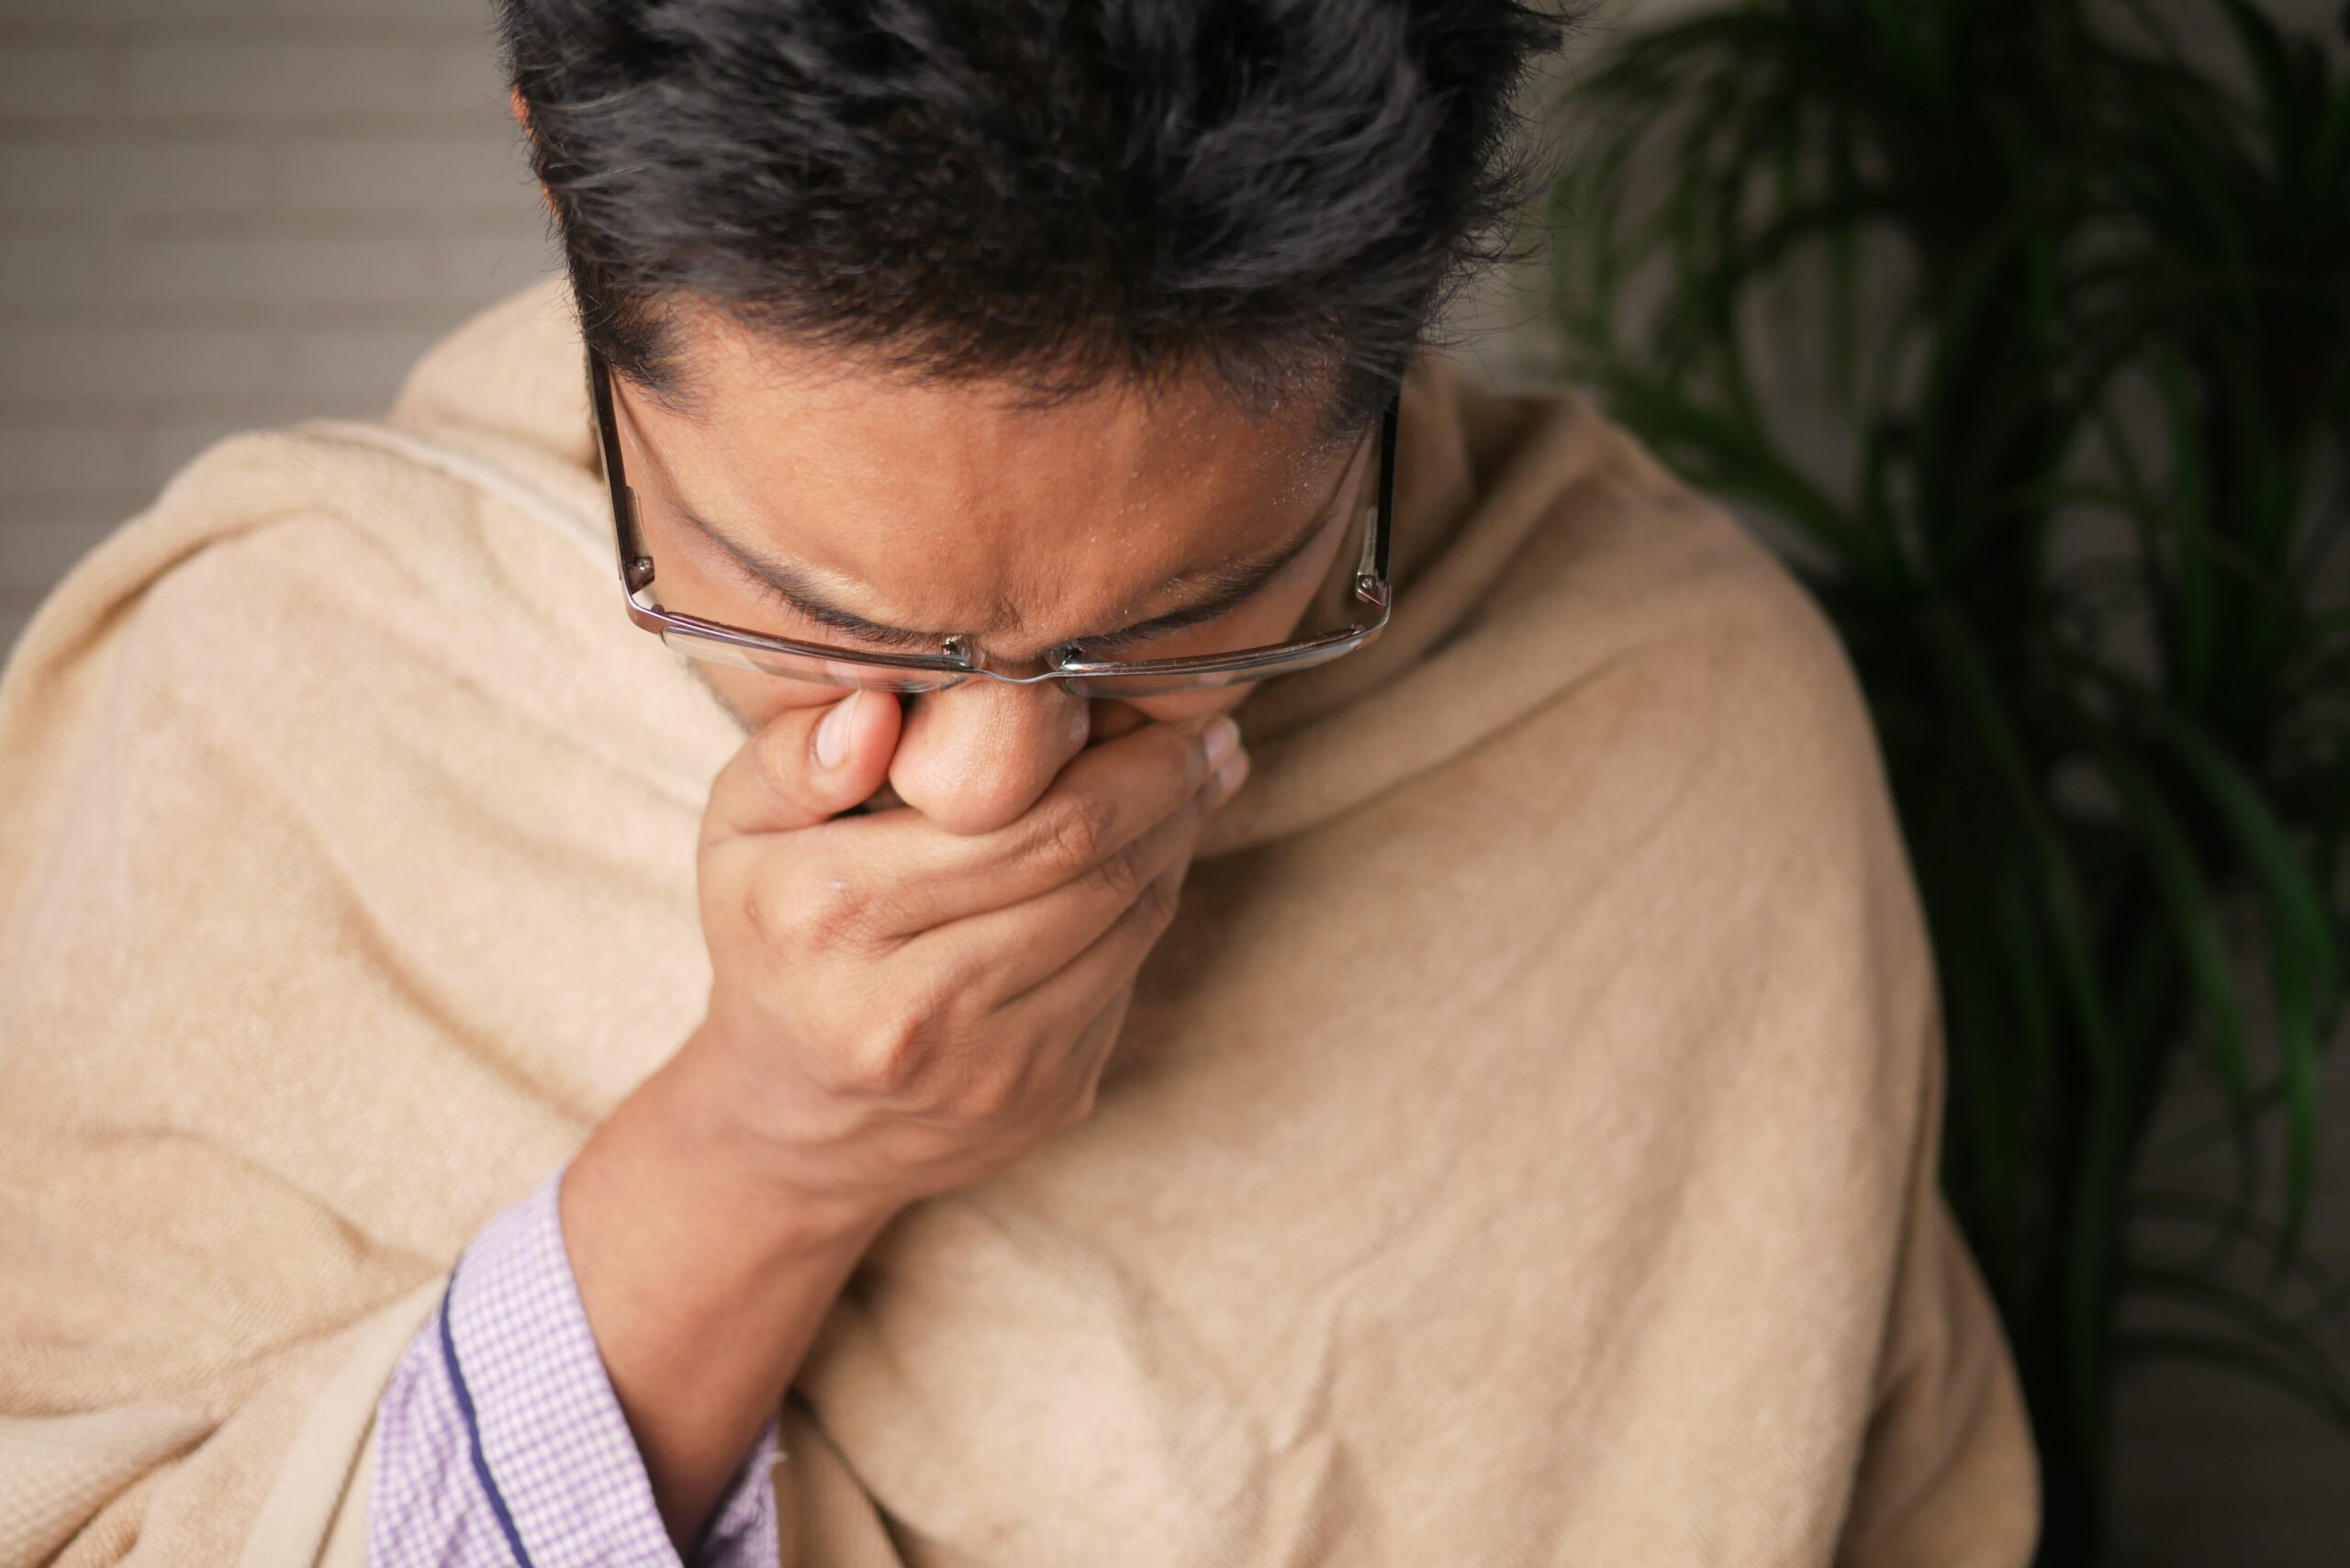 Chronic Obstructive Pulmonary Disease: Symptoms, Causes, and Treatment